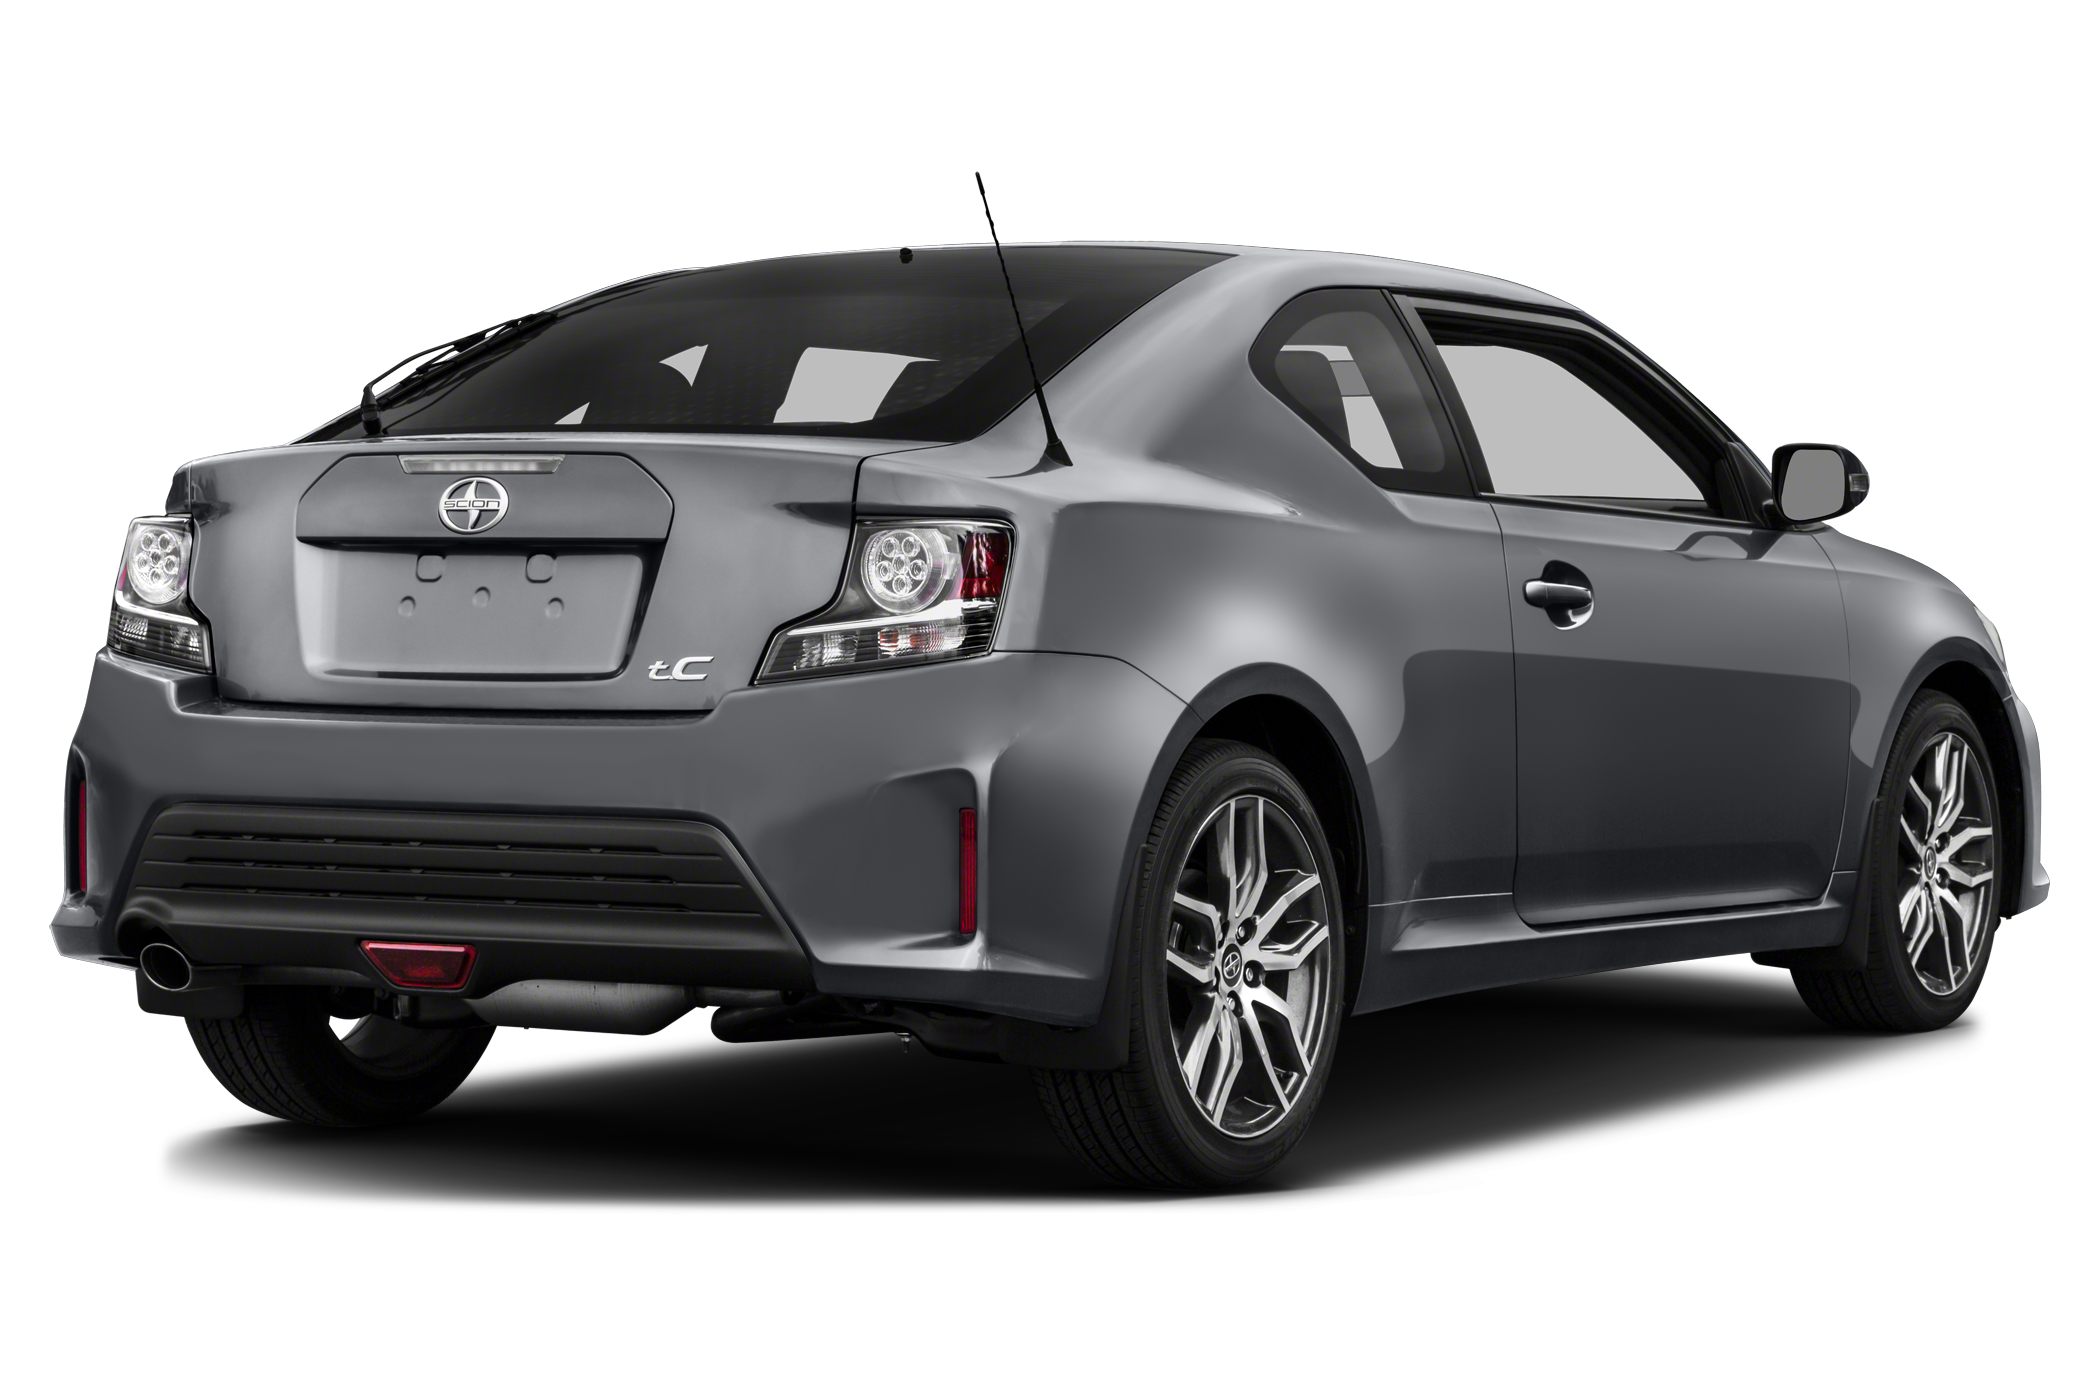 2016 Scion Tc Release Series 10 0 2dr Coupe Pricing And Options